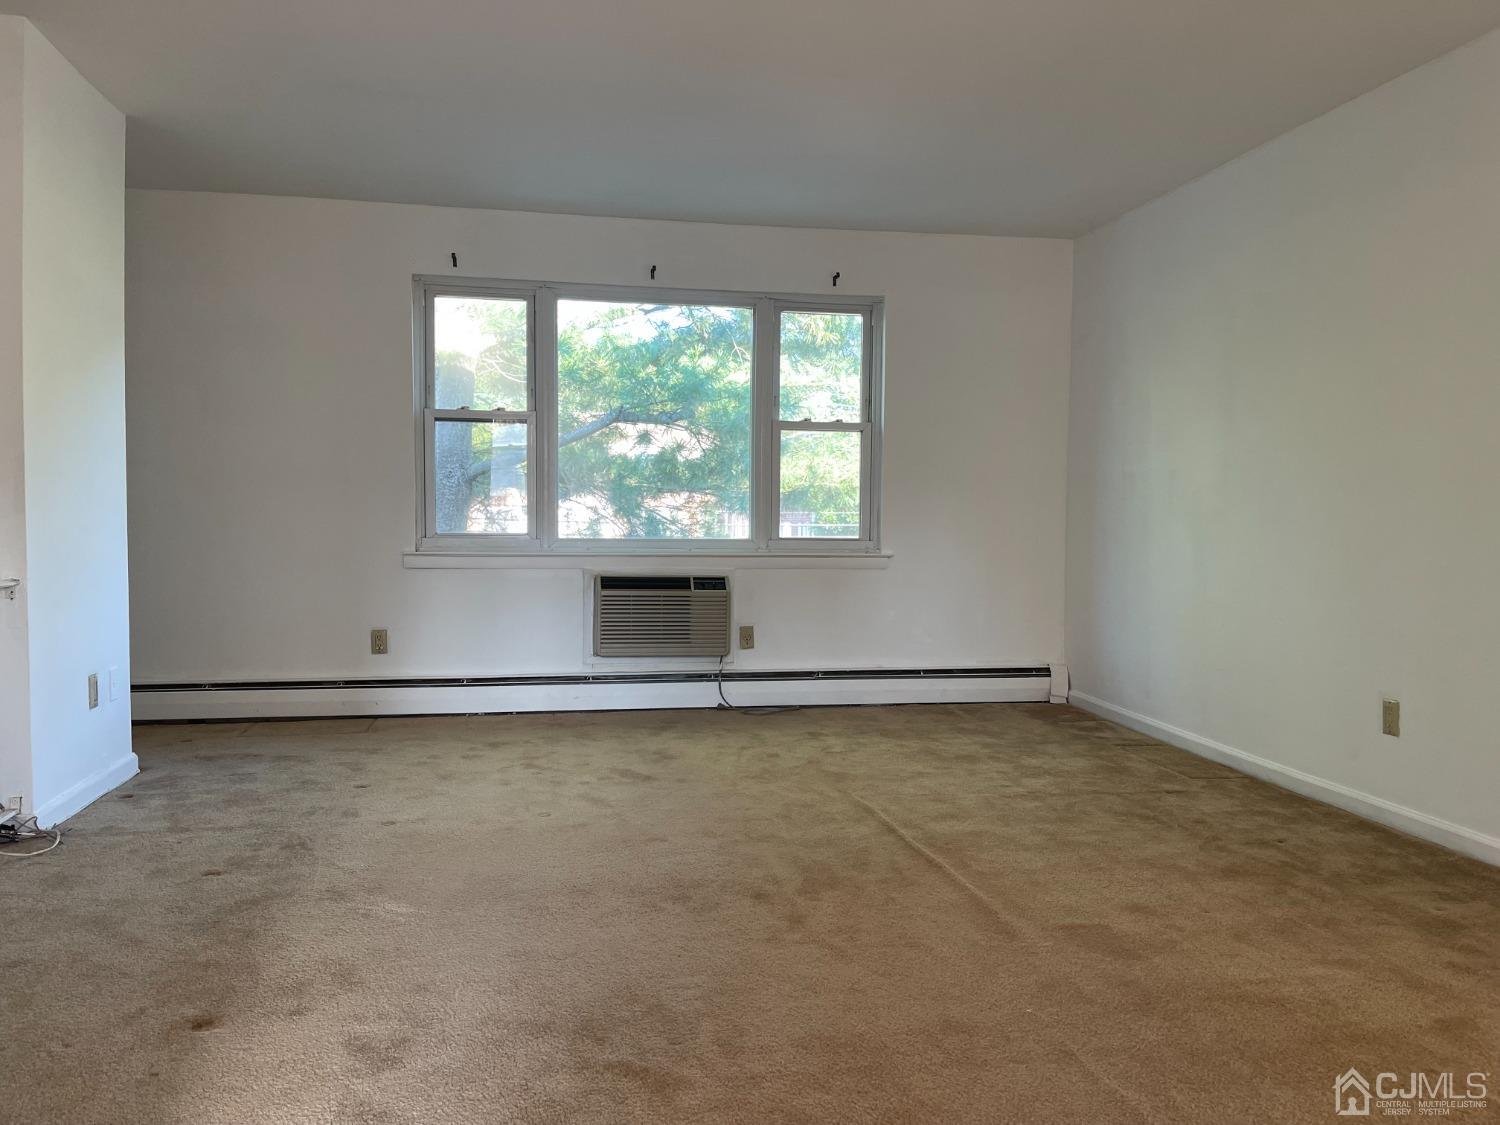 an empty room with a empty space and a window